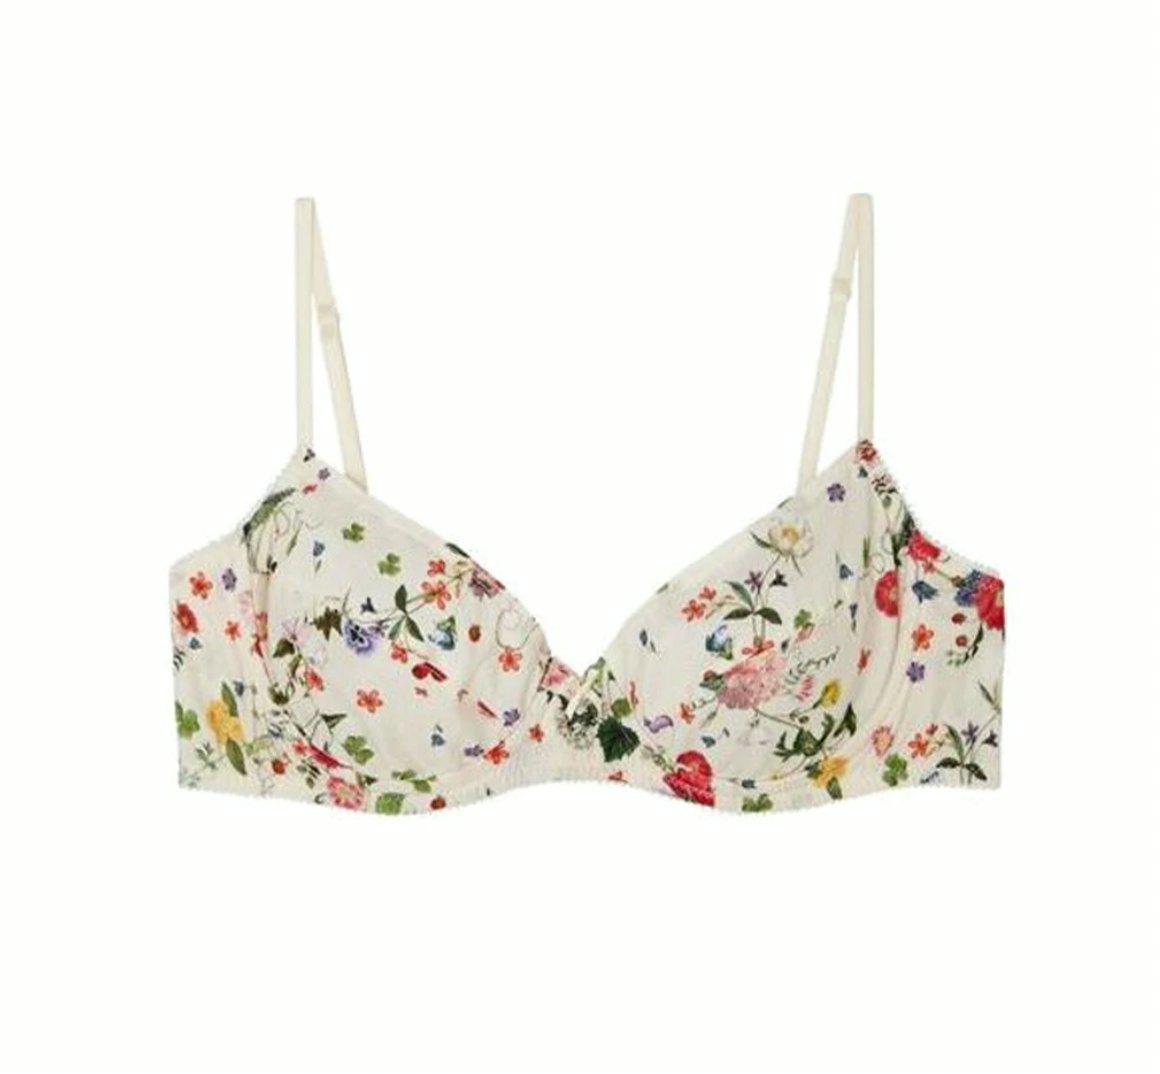 Lingerie Items That A Woman Must Have In Her Wardrobe